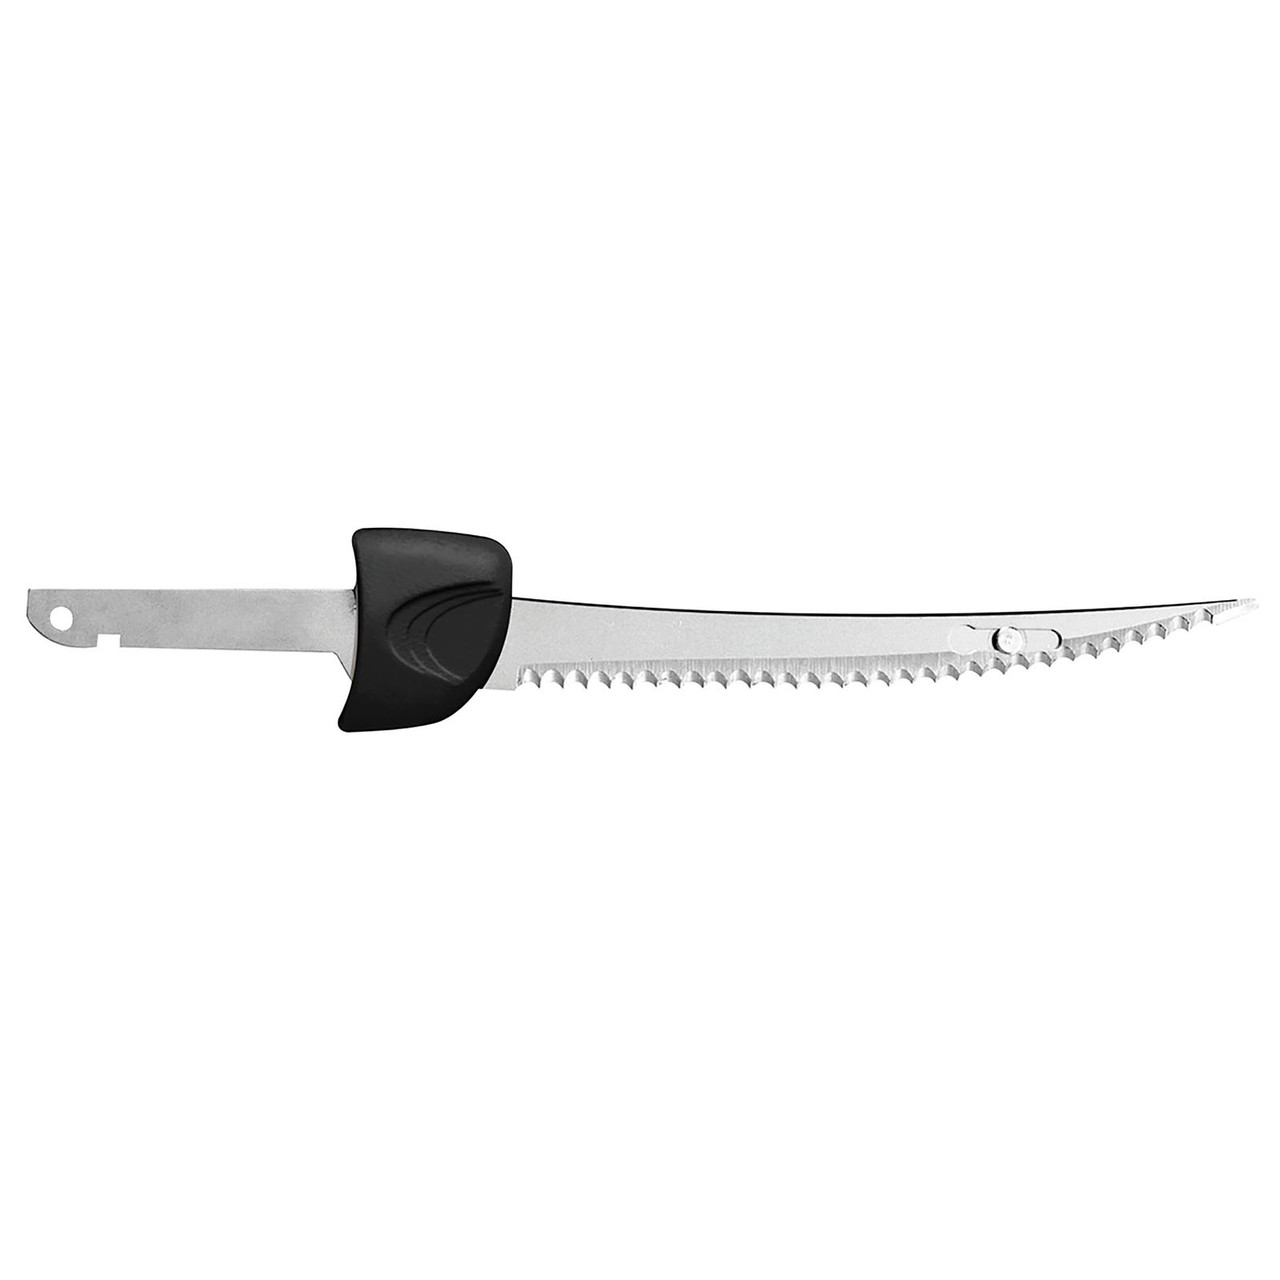 American Angler 5.5 in. Curved Tip Electric Fillet Knife Replacement Blade